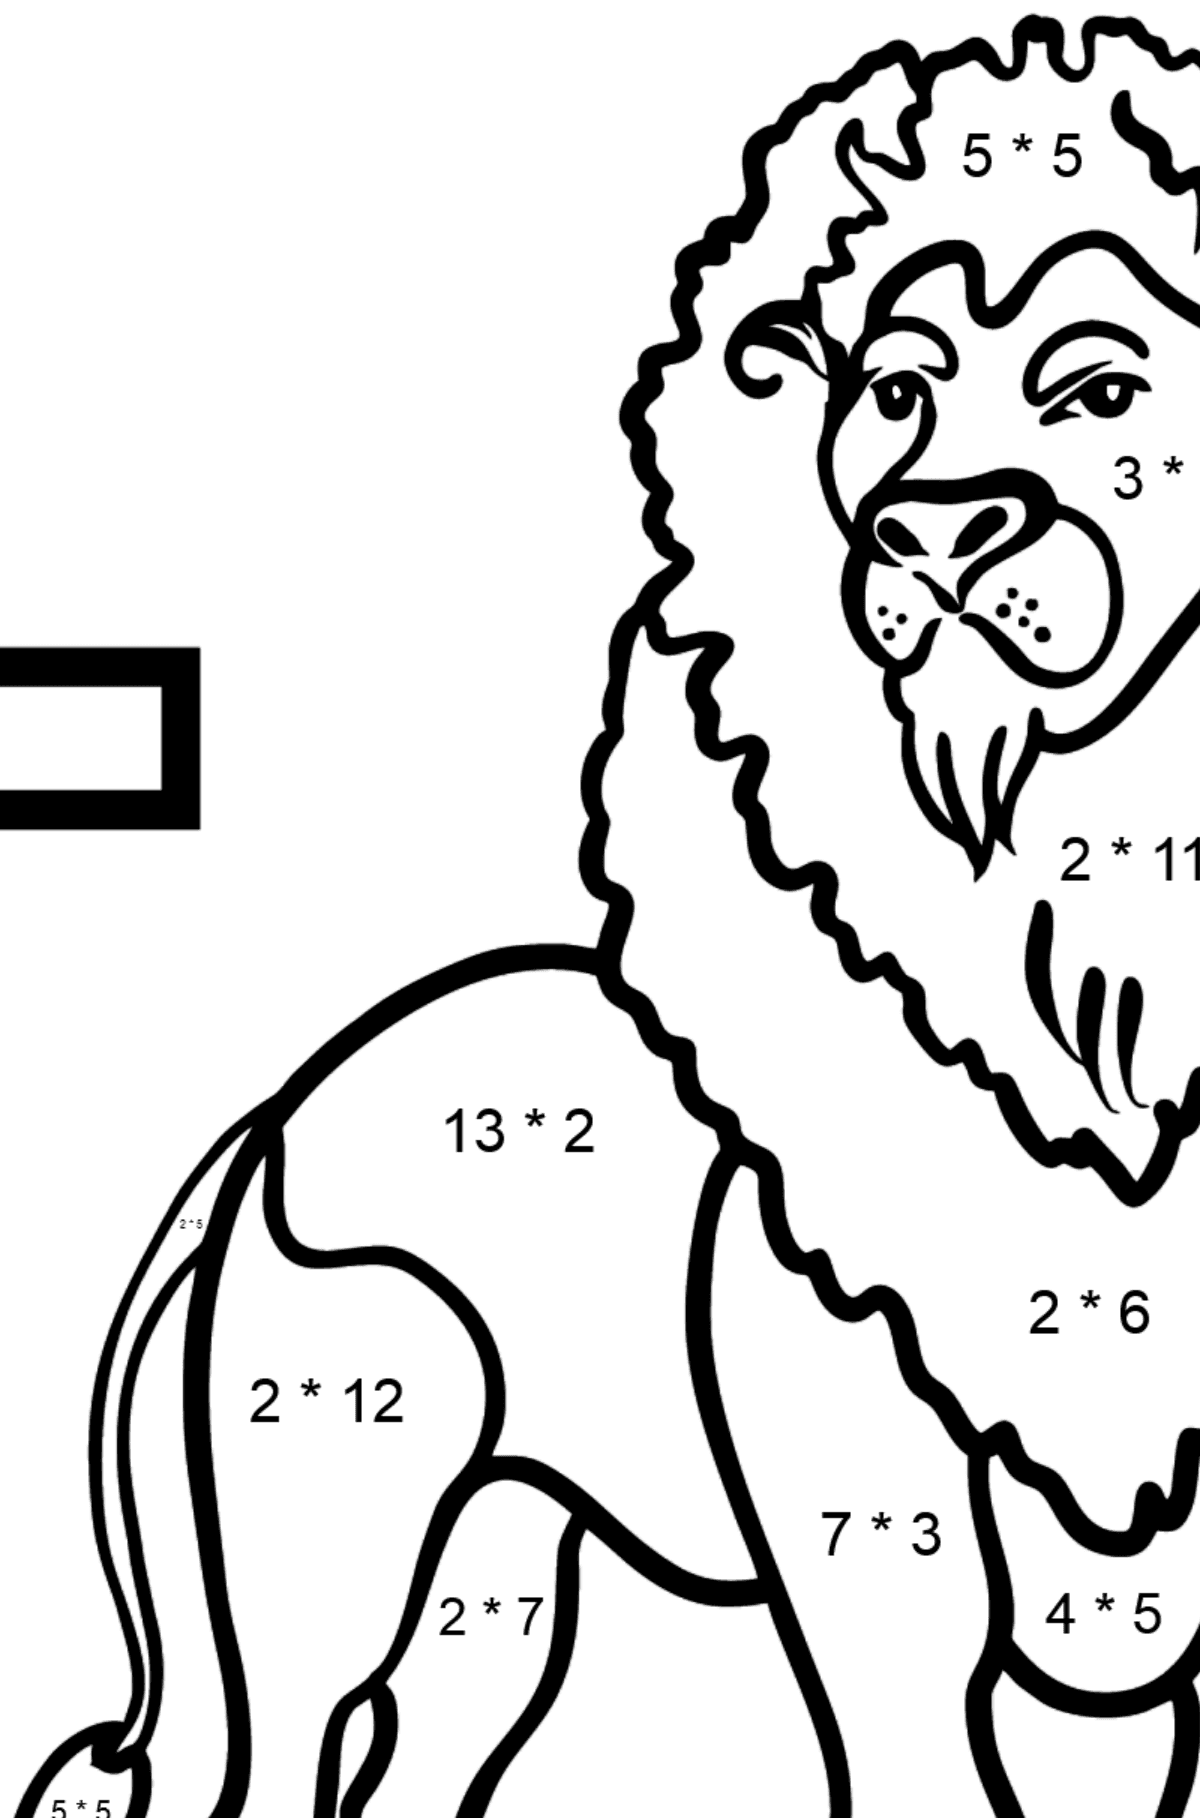 Spanish Letter L coloring pages - LEON - Math Coloring - Multiplication for Kids